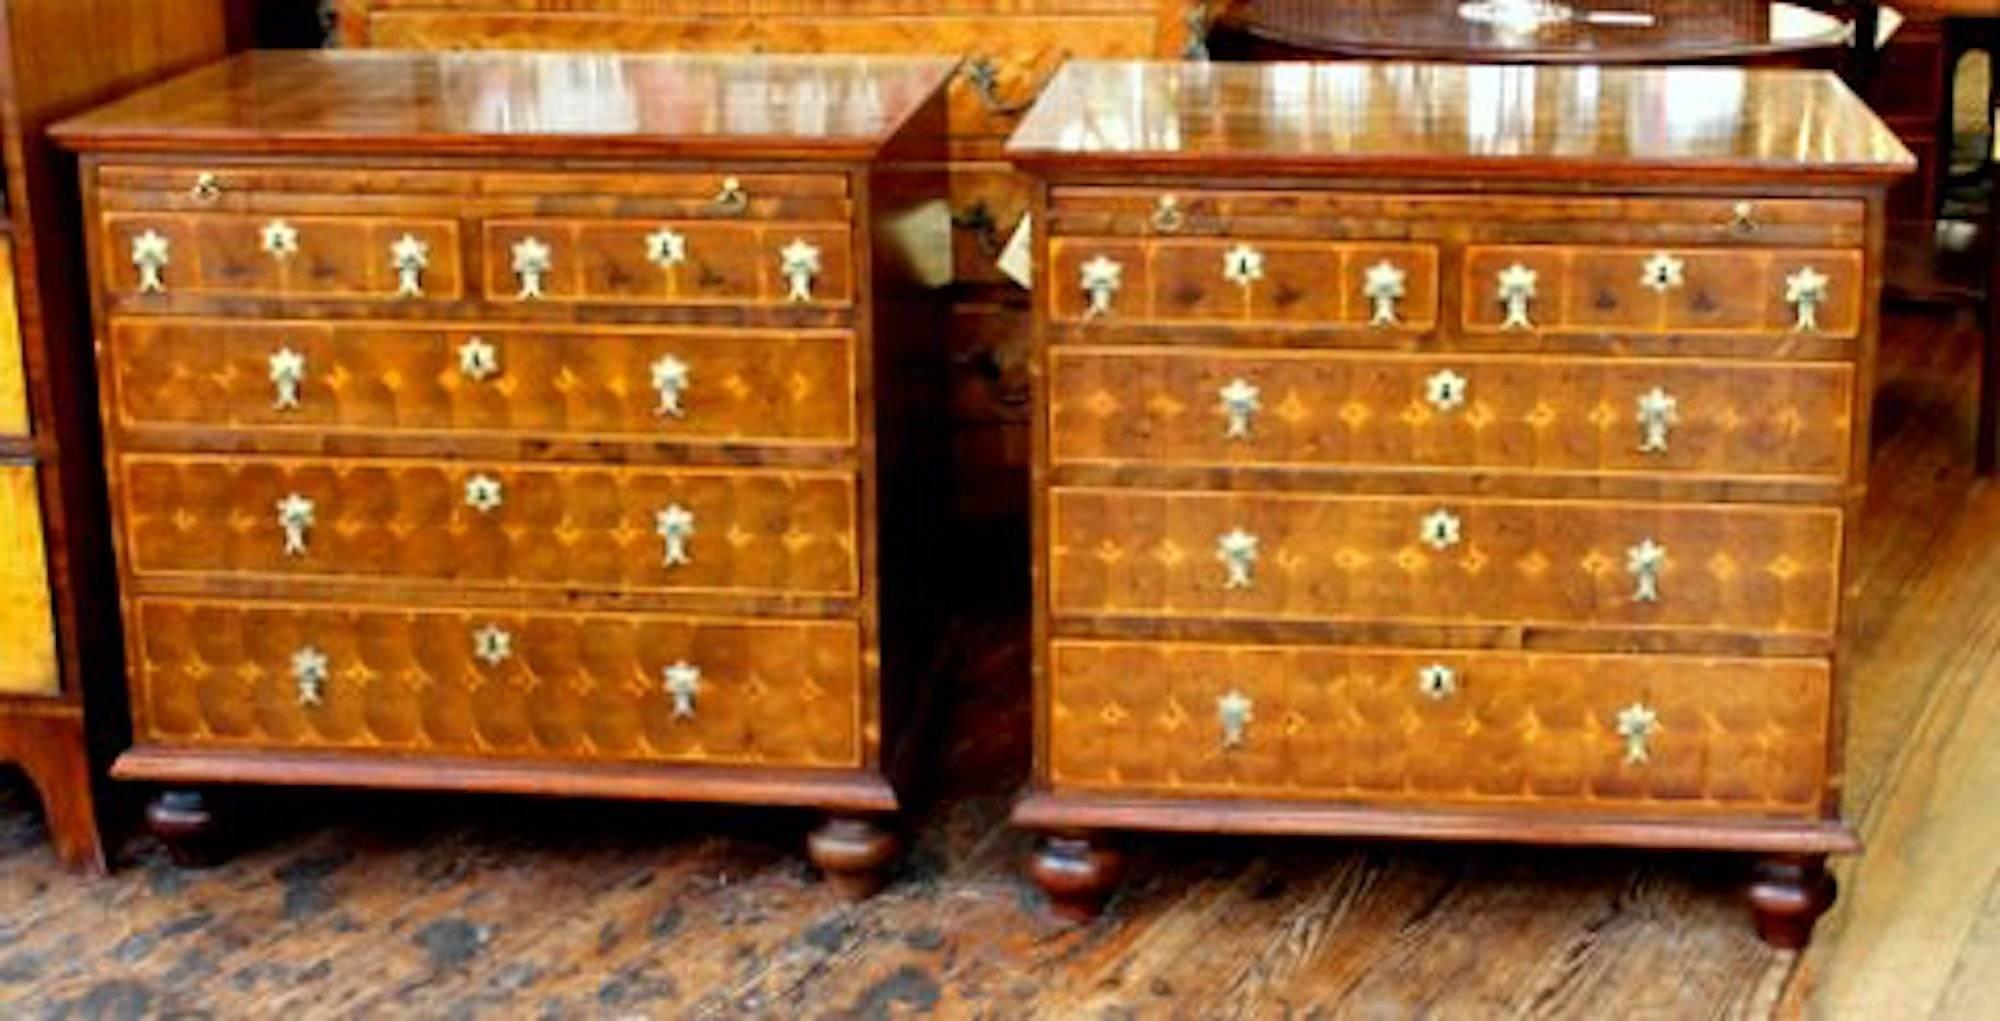 Pair of exceptionally fine and rare antique English oyster veneer laburnum and walnut Queen Anne Revival bachelor's chests with brushing slides and period style brasses. Please note the fabulous 